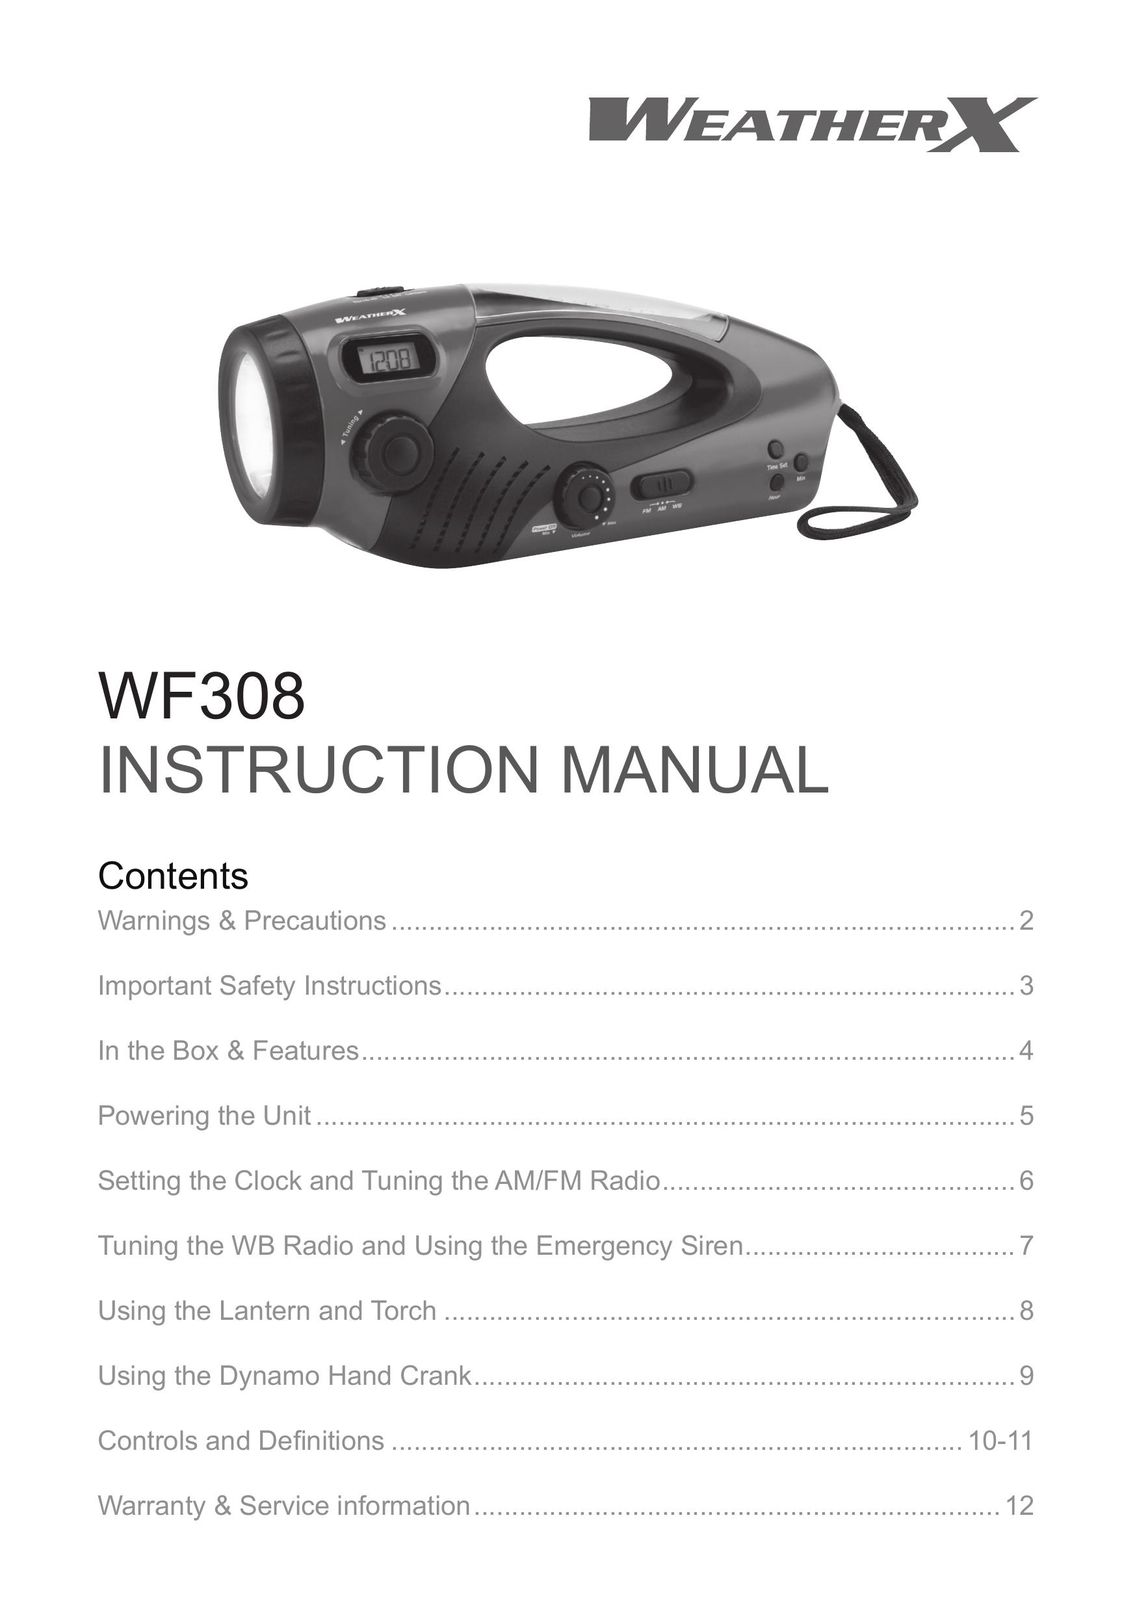 Weather X WF308 Home Safety Product User Manual